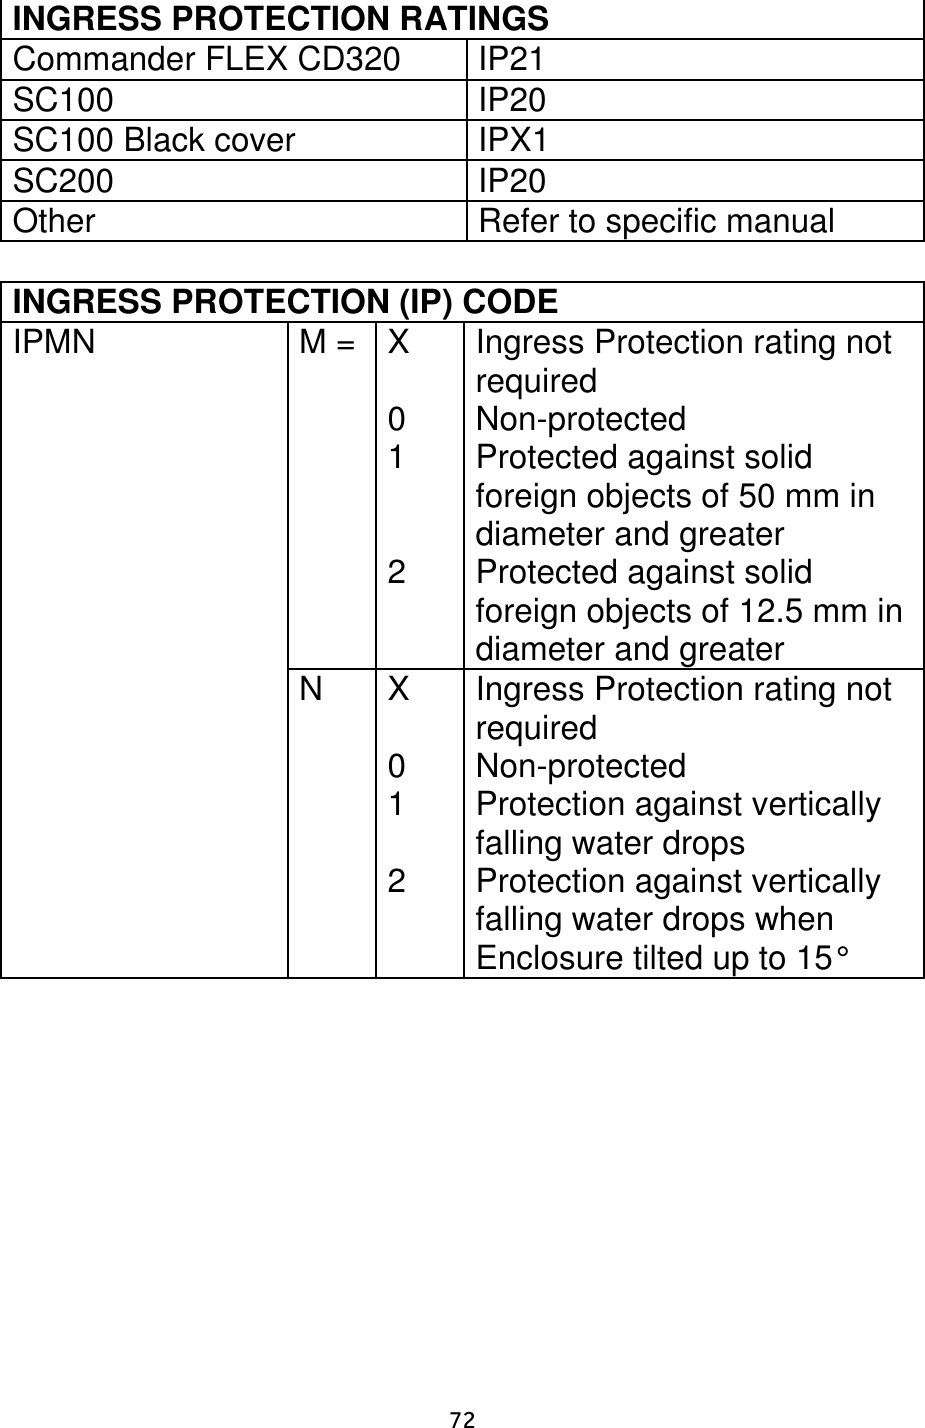                      72 INGRESS PROTECTION RATINGS  Commander FLEX CD320 IP21 SC100 IP20 SC100 Black cover IPX1 SC200 IP20 Other Refer to specific manual  INGRESS PROTECTION (IP) CODE  IPMN M = X  0 1   2 Ingress Protection rating not required Non-protected Protected against solid foreign objects of 50 mm in diameter and greater Protected against solid foreign objects of 12.5 mm in diameter and greater  N X  0 1  2 Ingress Protection rating not required Non-protected Protection against vertically falling water drops Protection against vertically falling water drops when Enclosure tilted up to 15°    